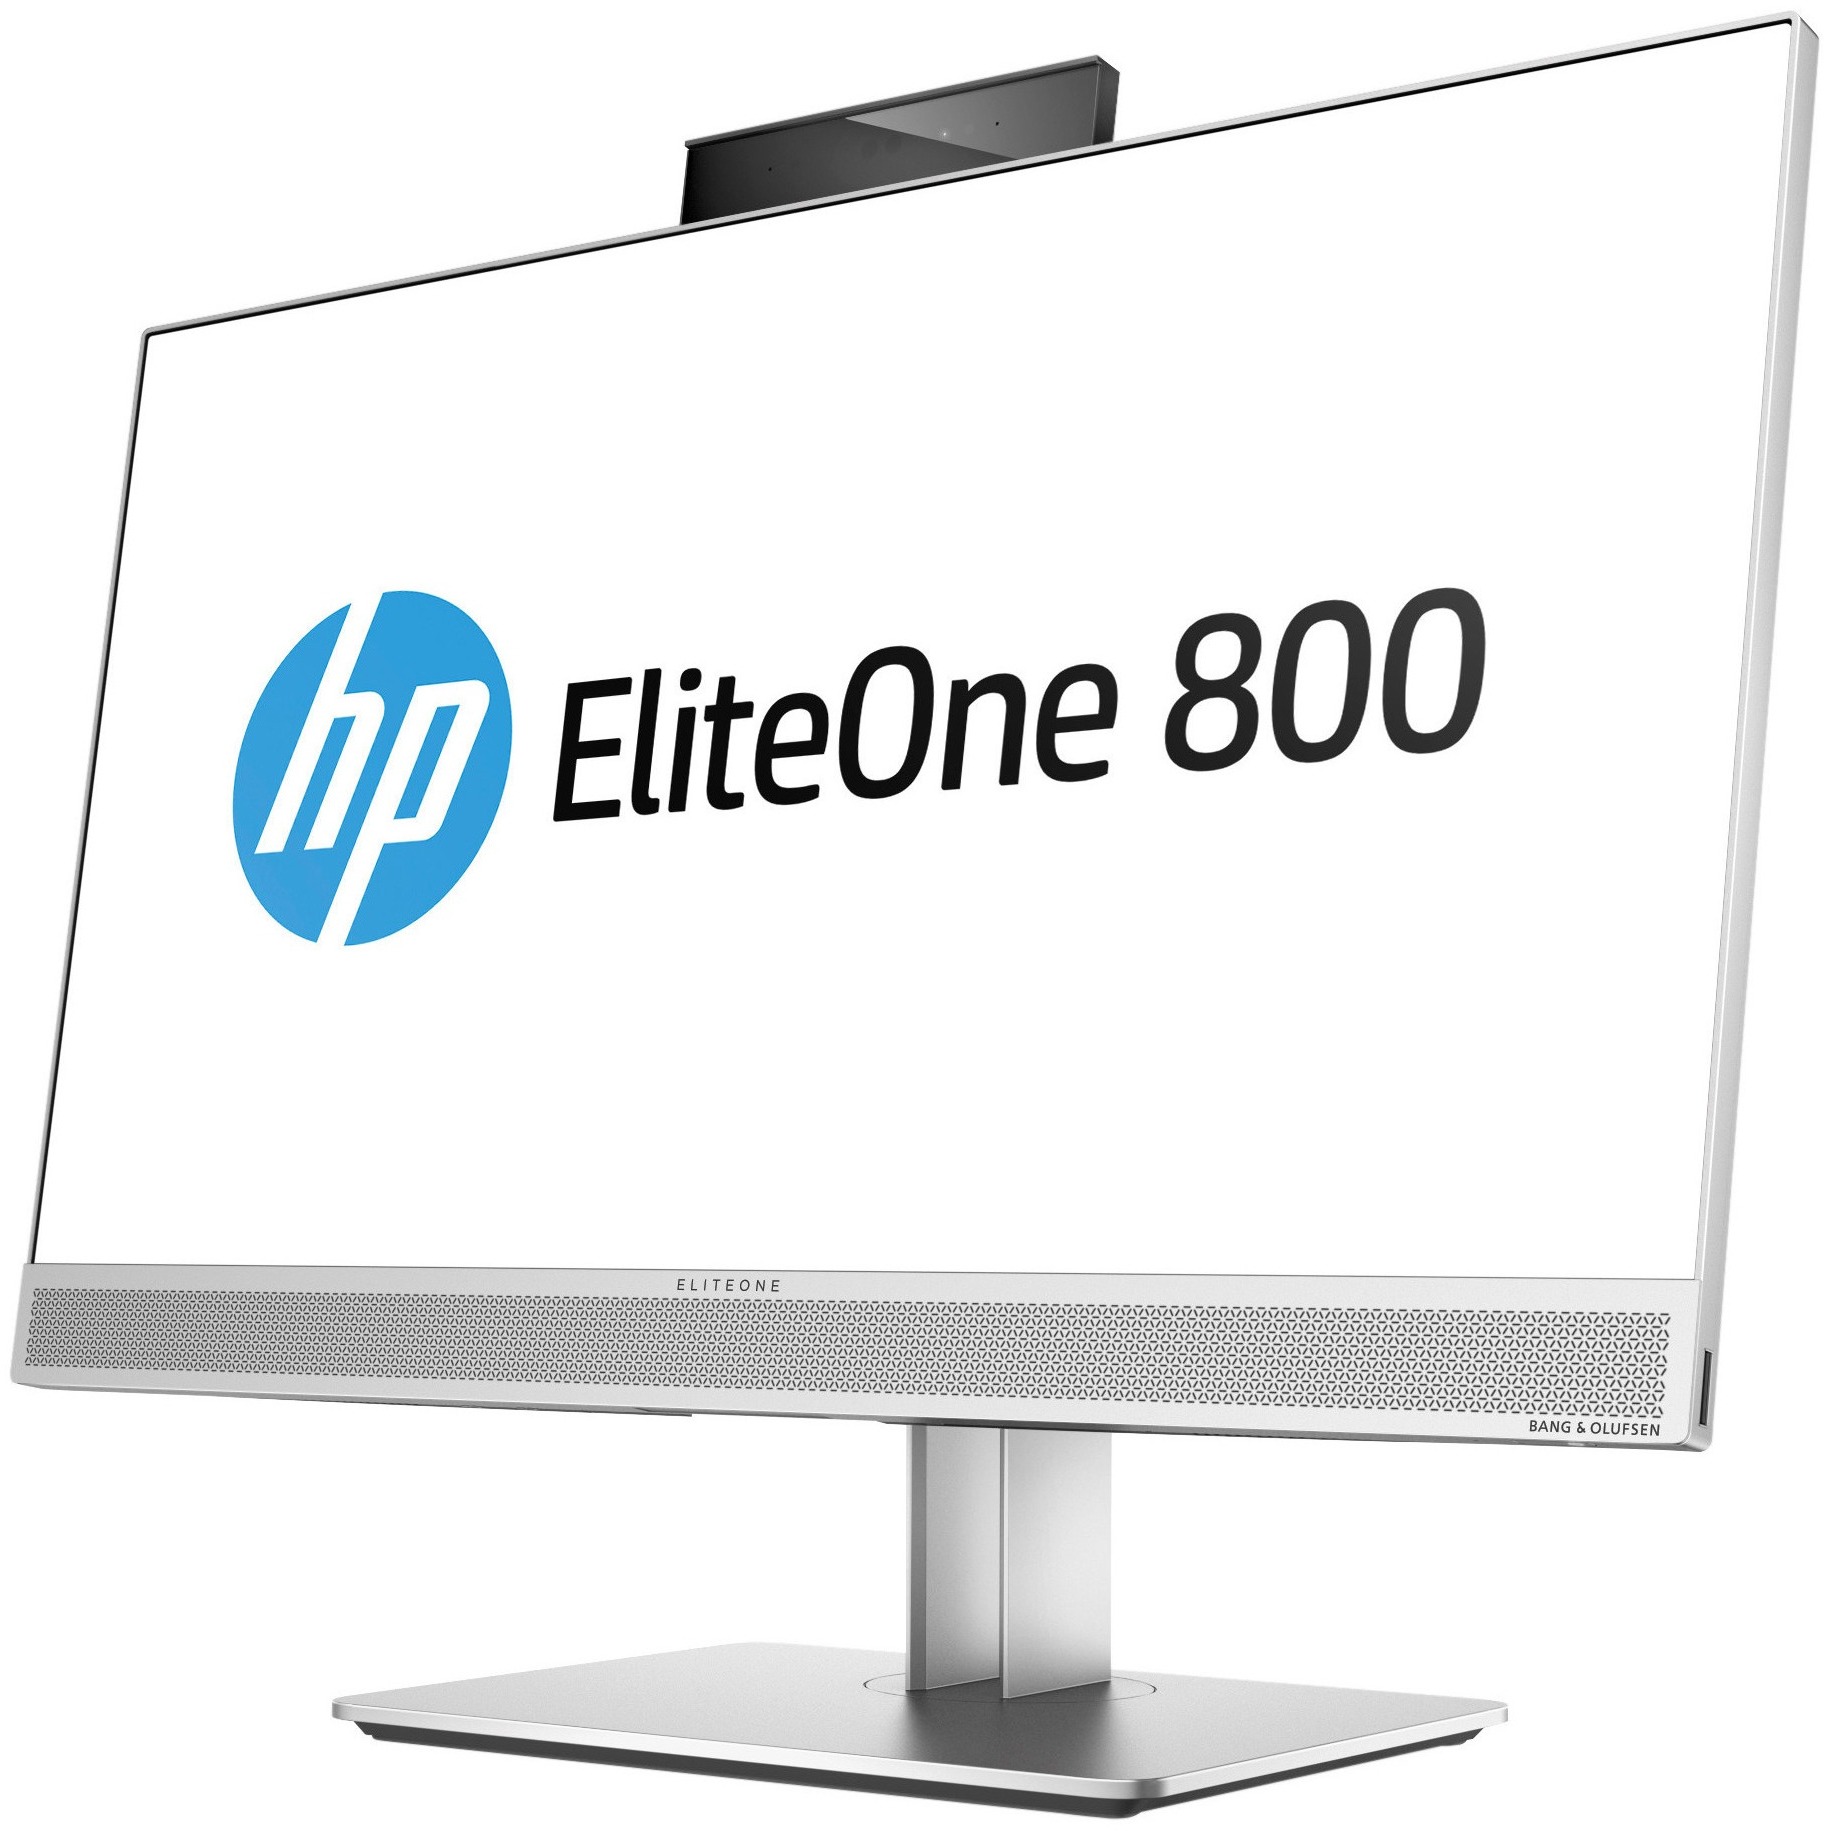 HP EliteOne 800 G4 All-in-One Computer - Core i5-8500 - 16GB RAM - 256GB SSD - 23.8" 1920 x 1080 Display - Intel UHD Graphics 630 - Windows 10 Home - image 2 of 5